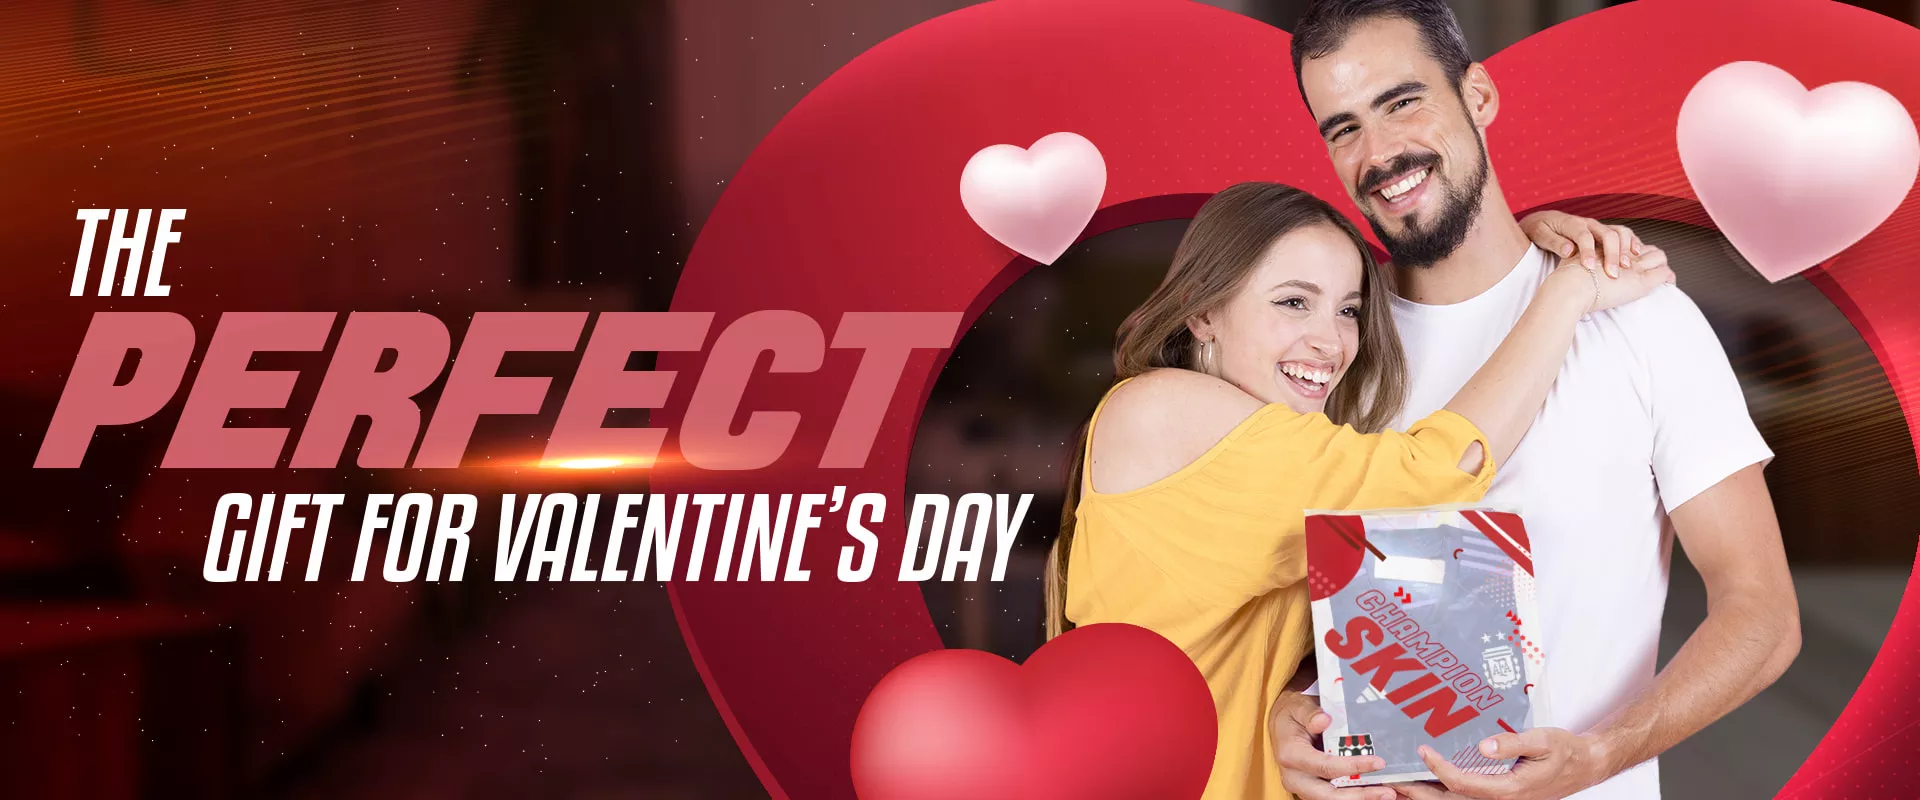 san valentine gifts for him - Pro Jersey Shop